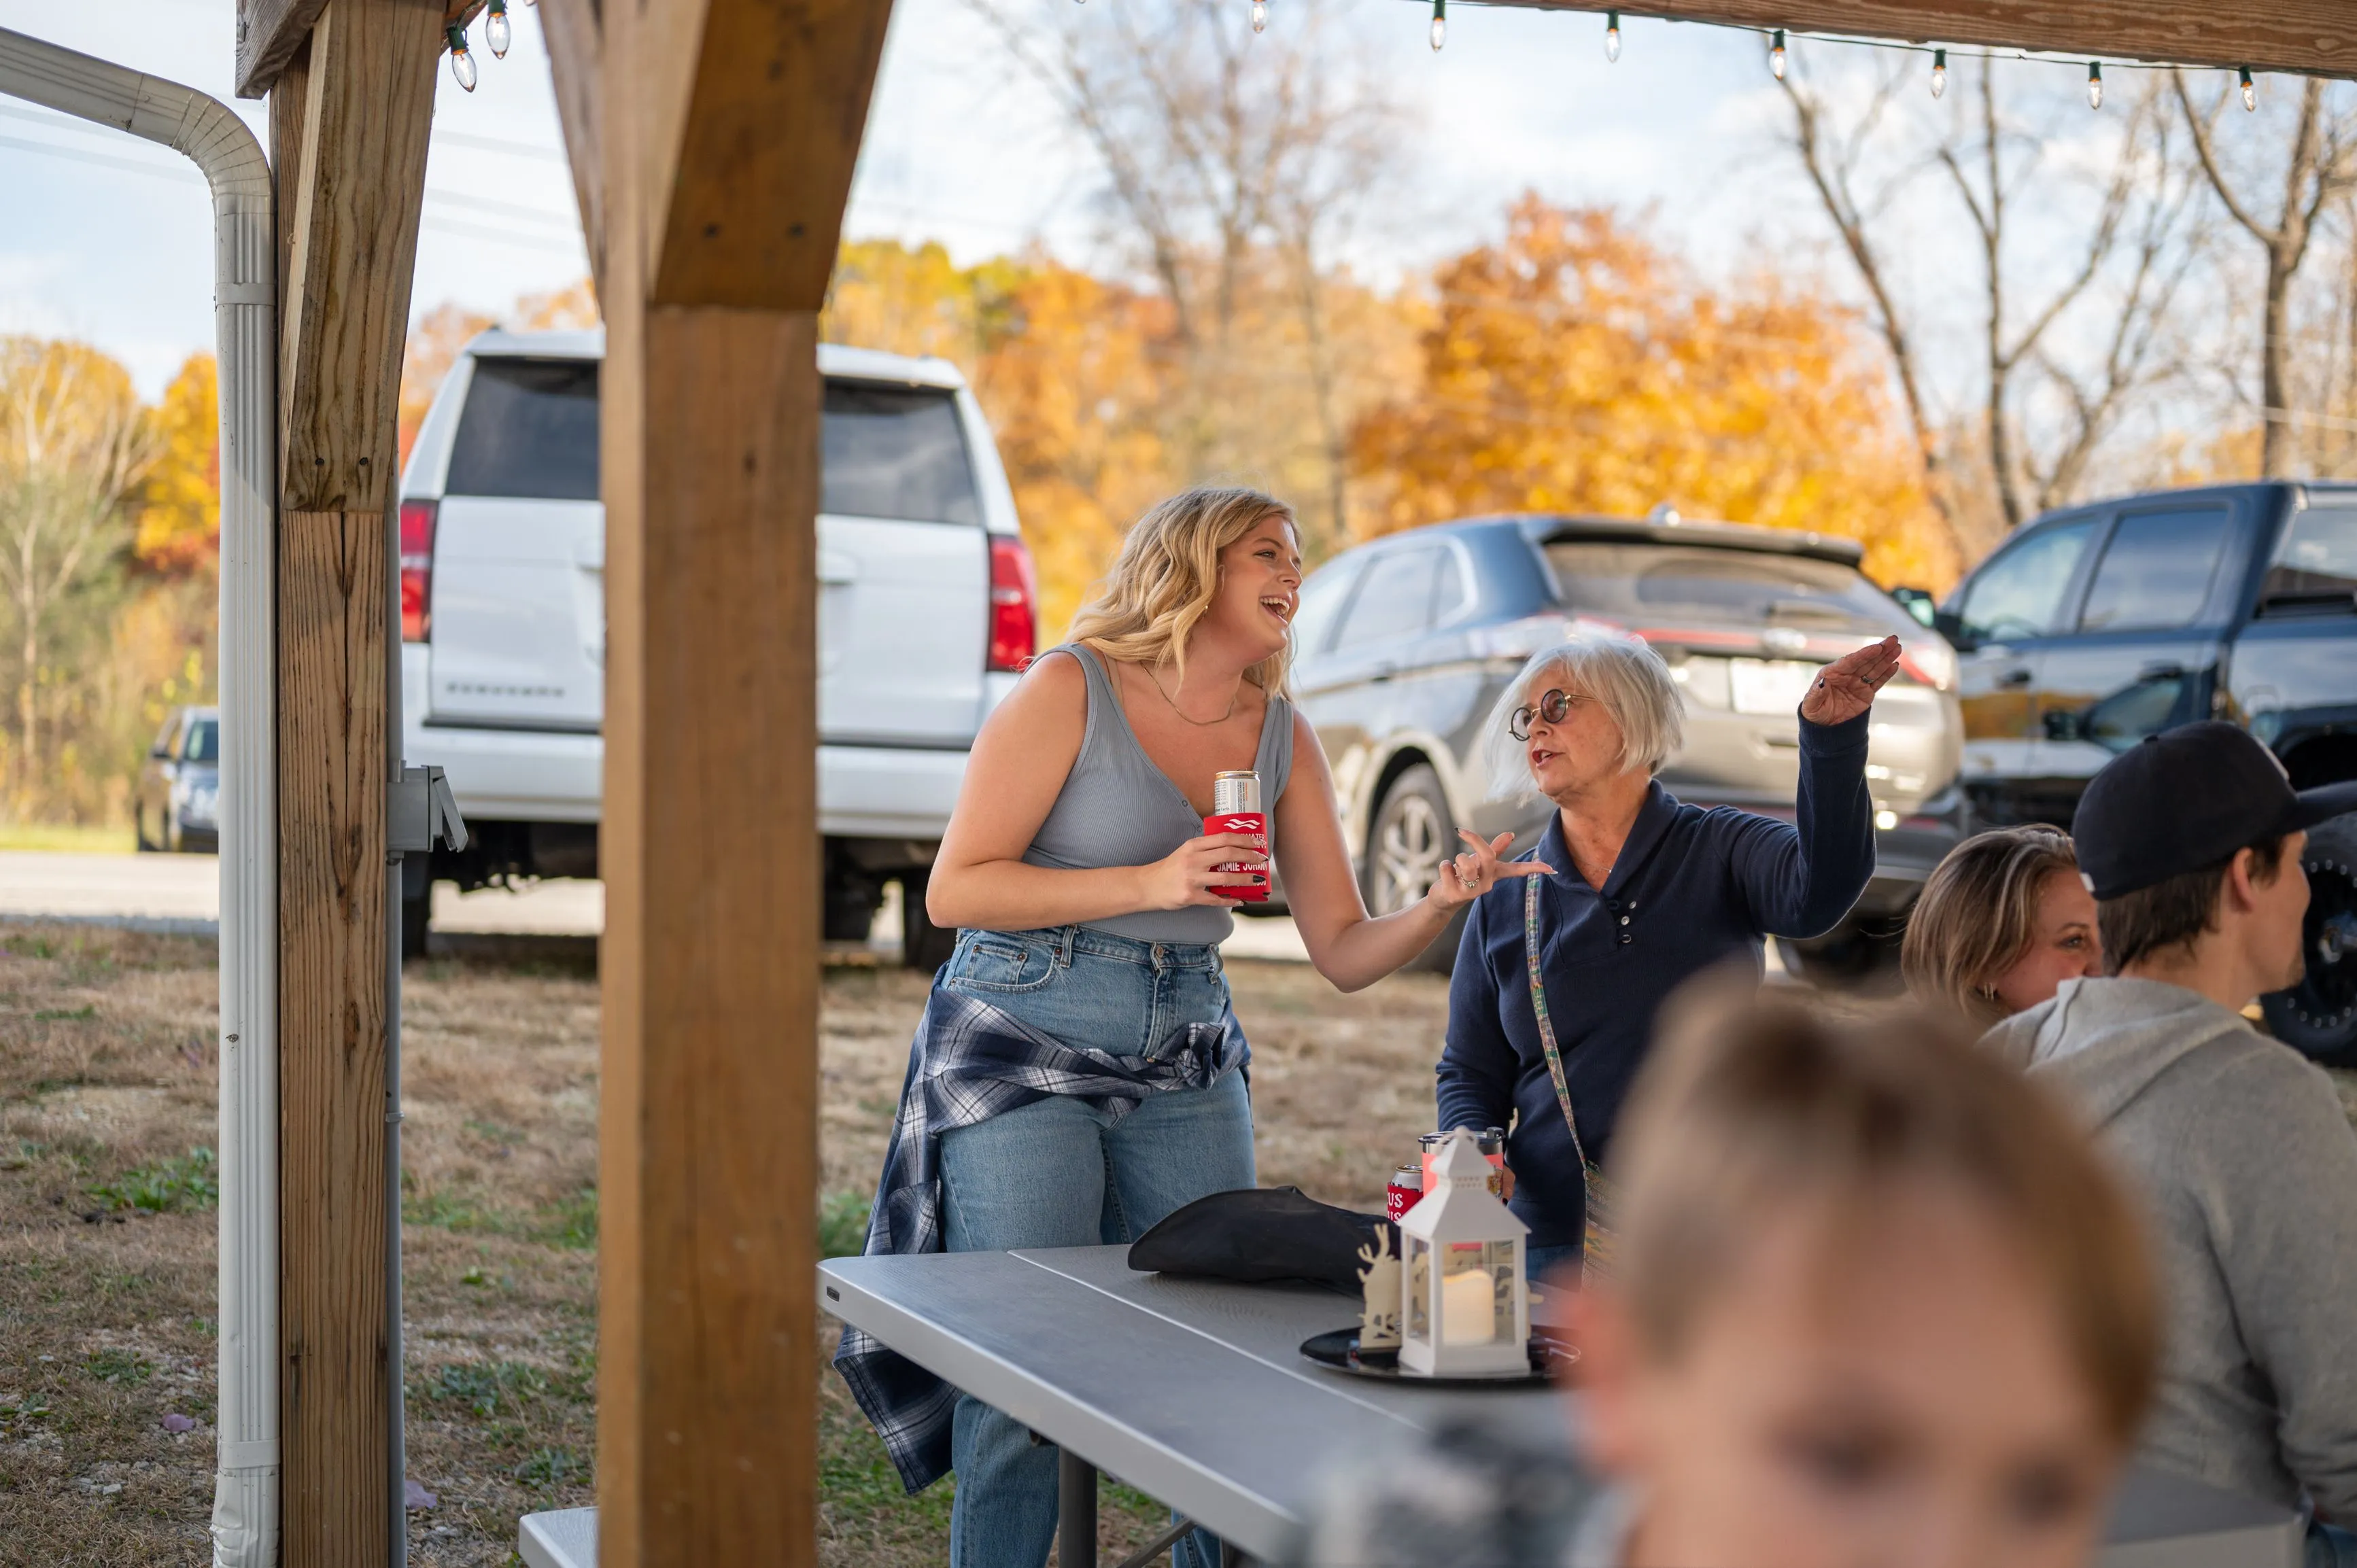 People socializing at an outdoor picnic area with vehicles parked in the background during autumn.